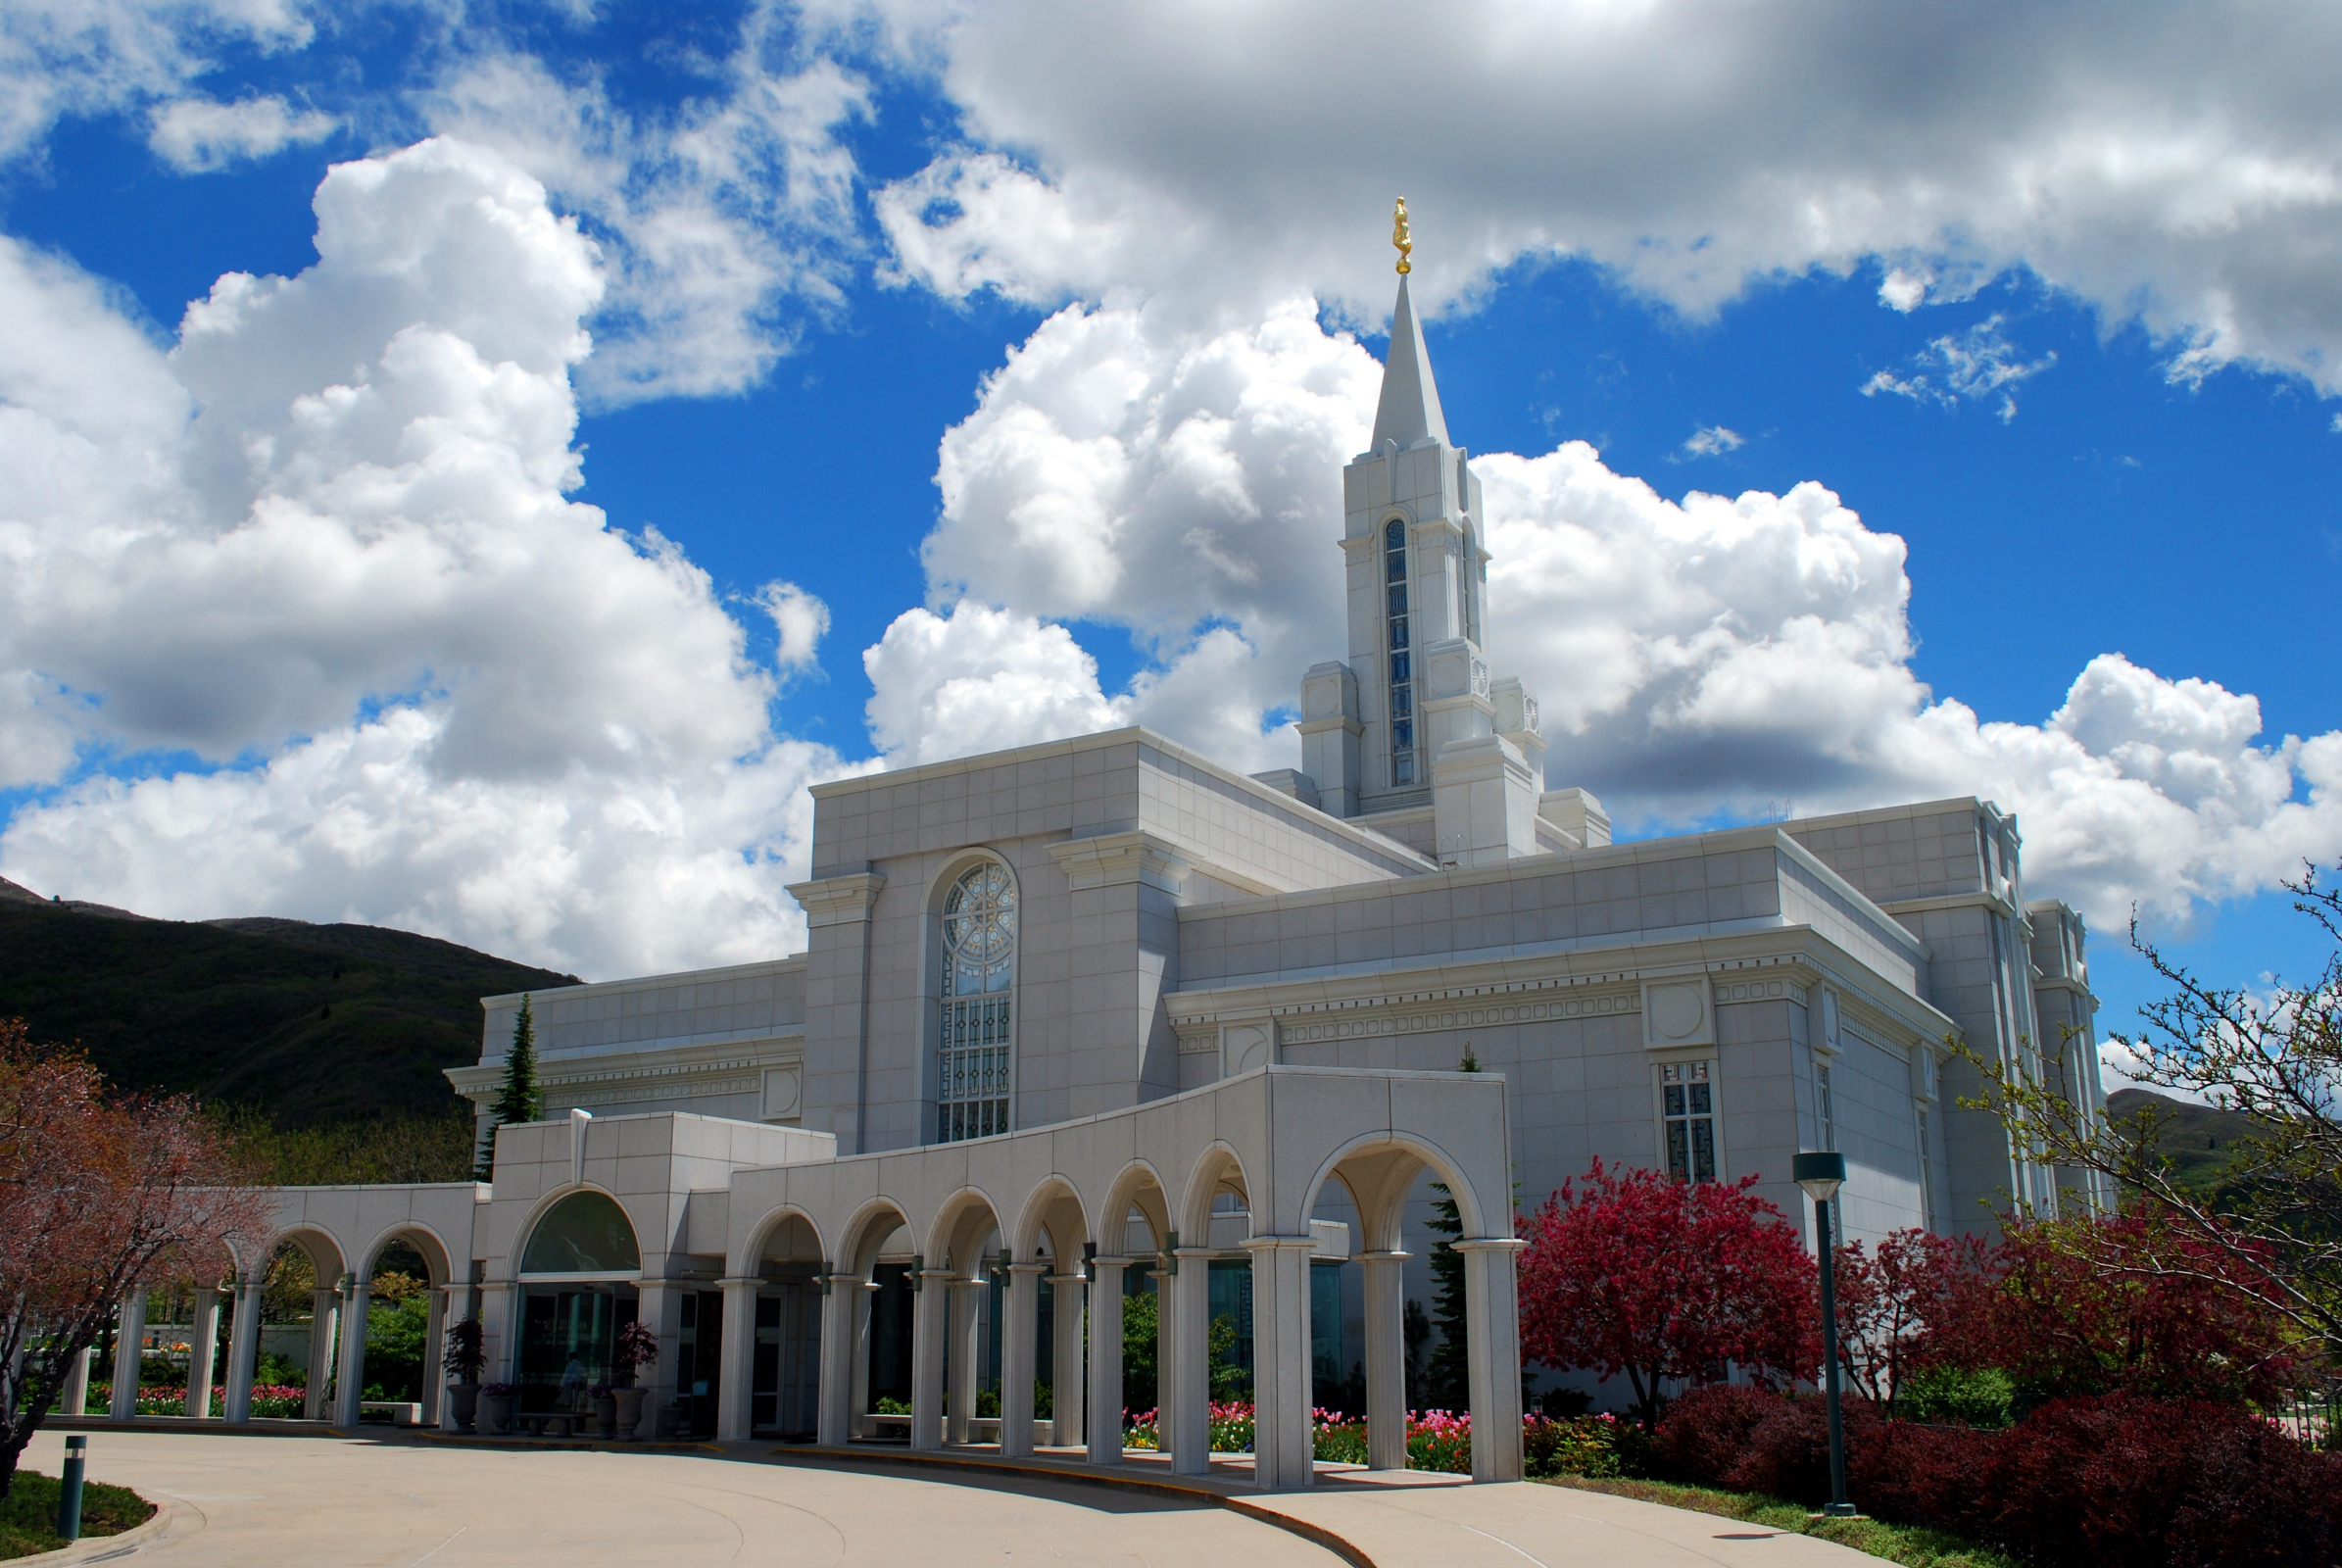 The Main Entrance to the Bountiful Utah Temple